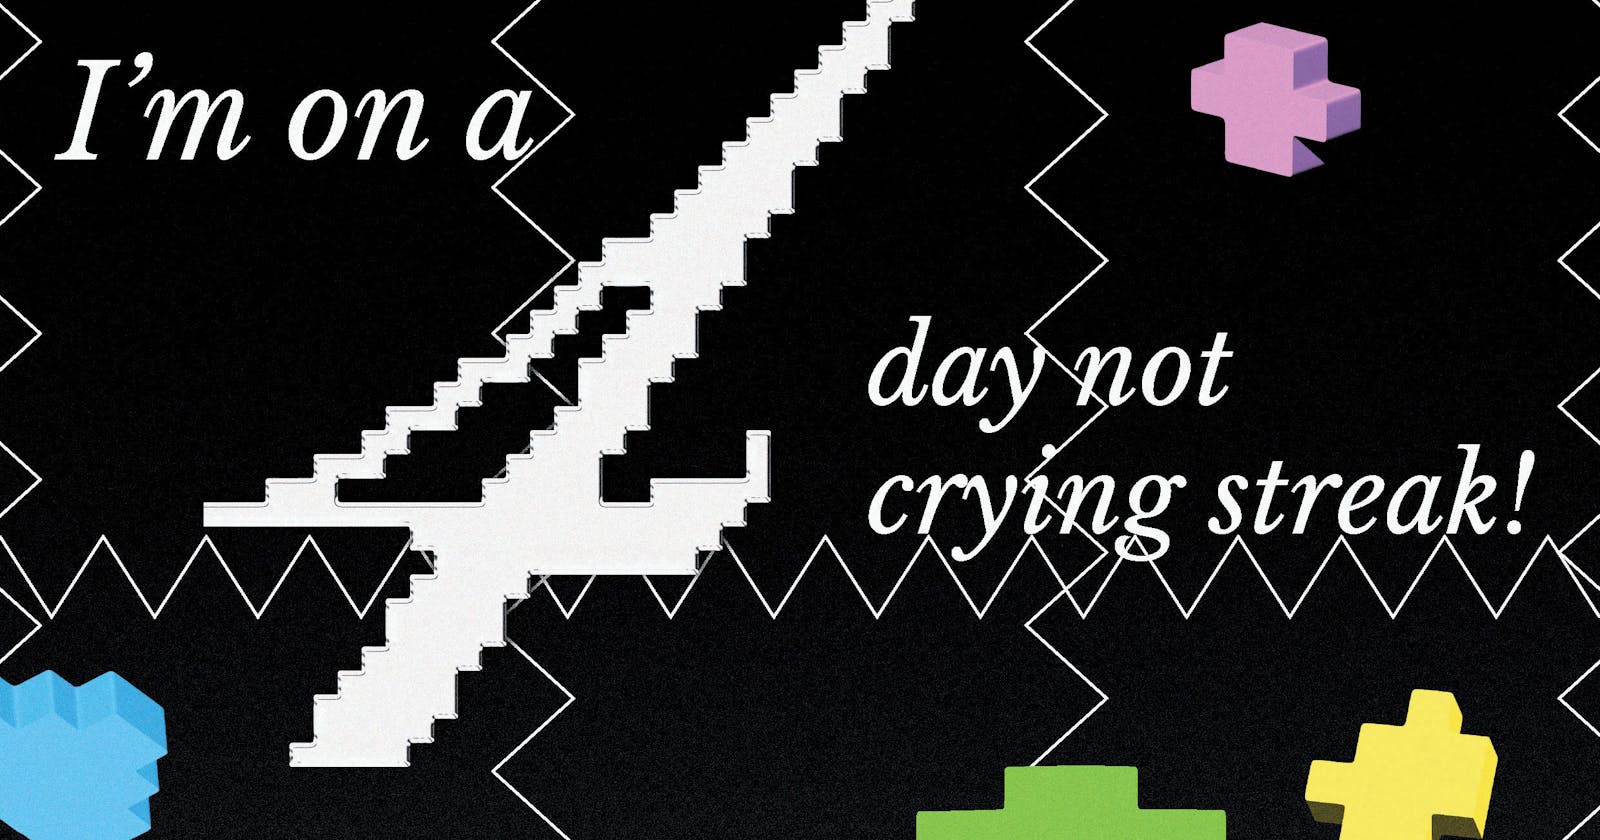 Poster Design: I'm On A 4-Day Not Crying Streak!